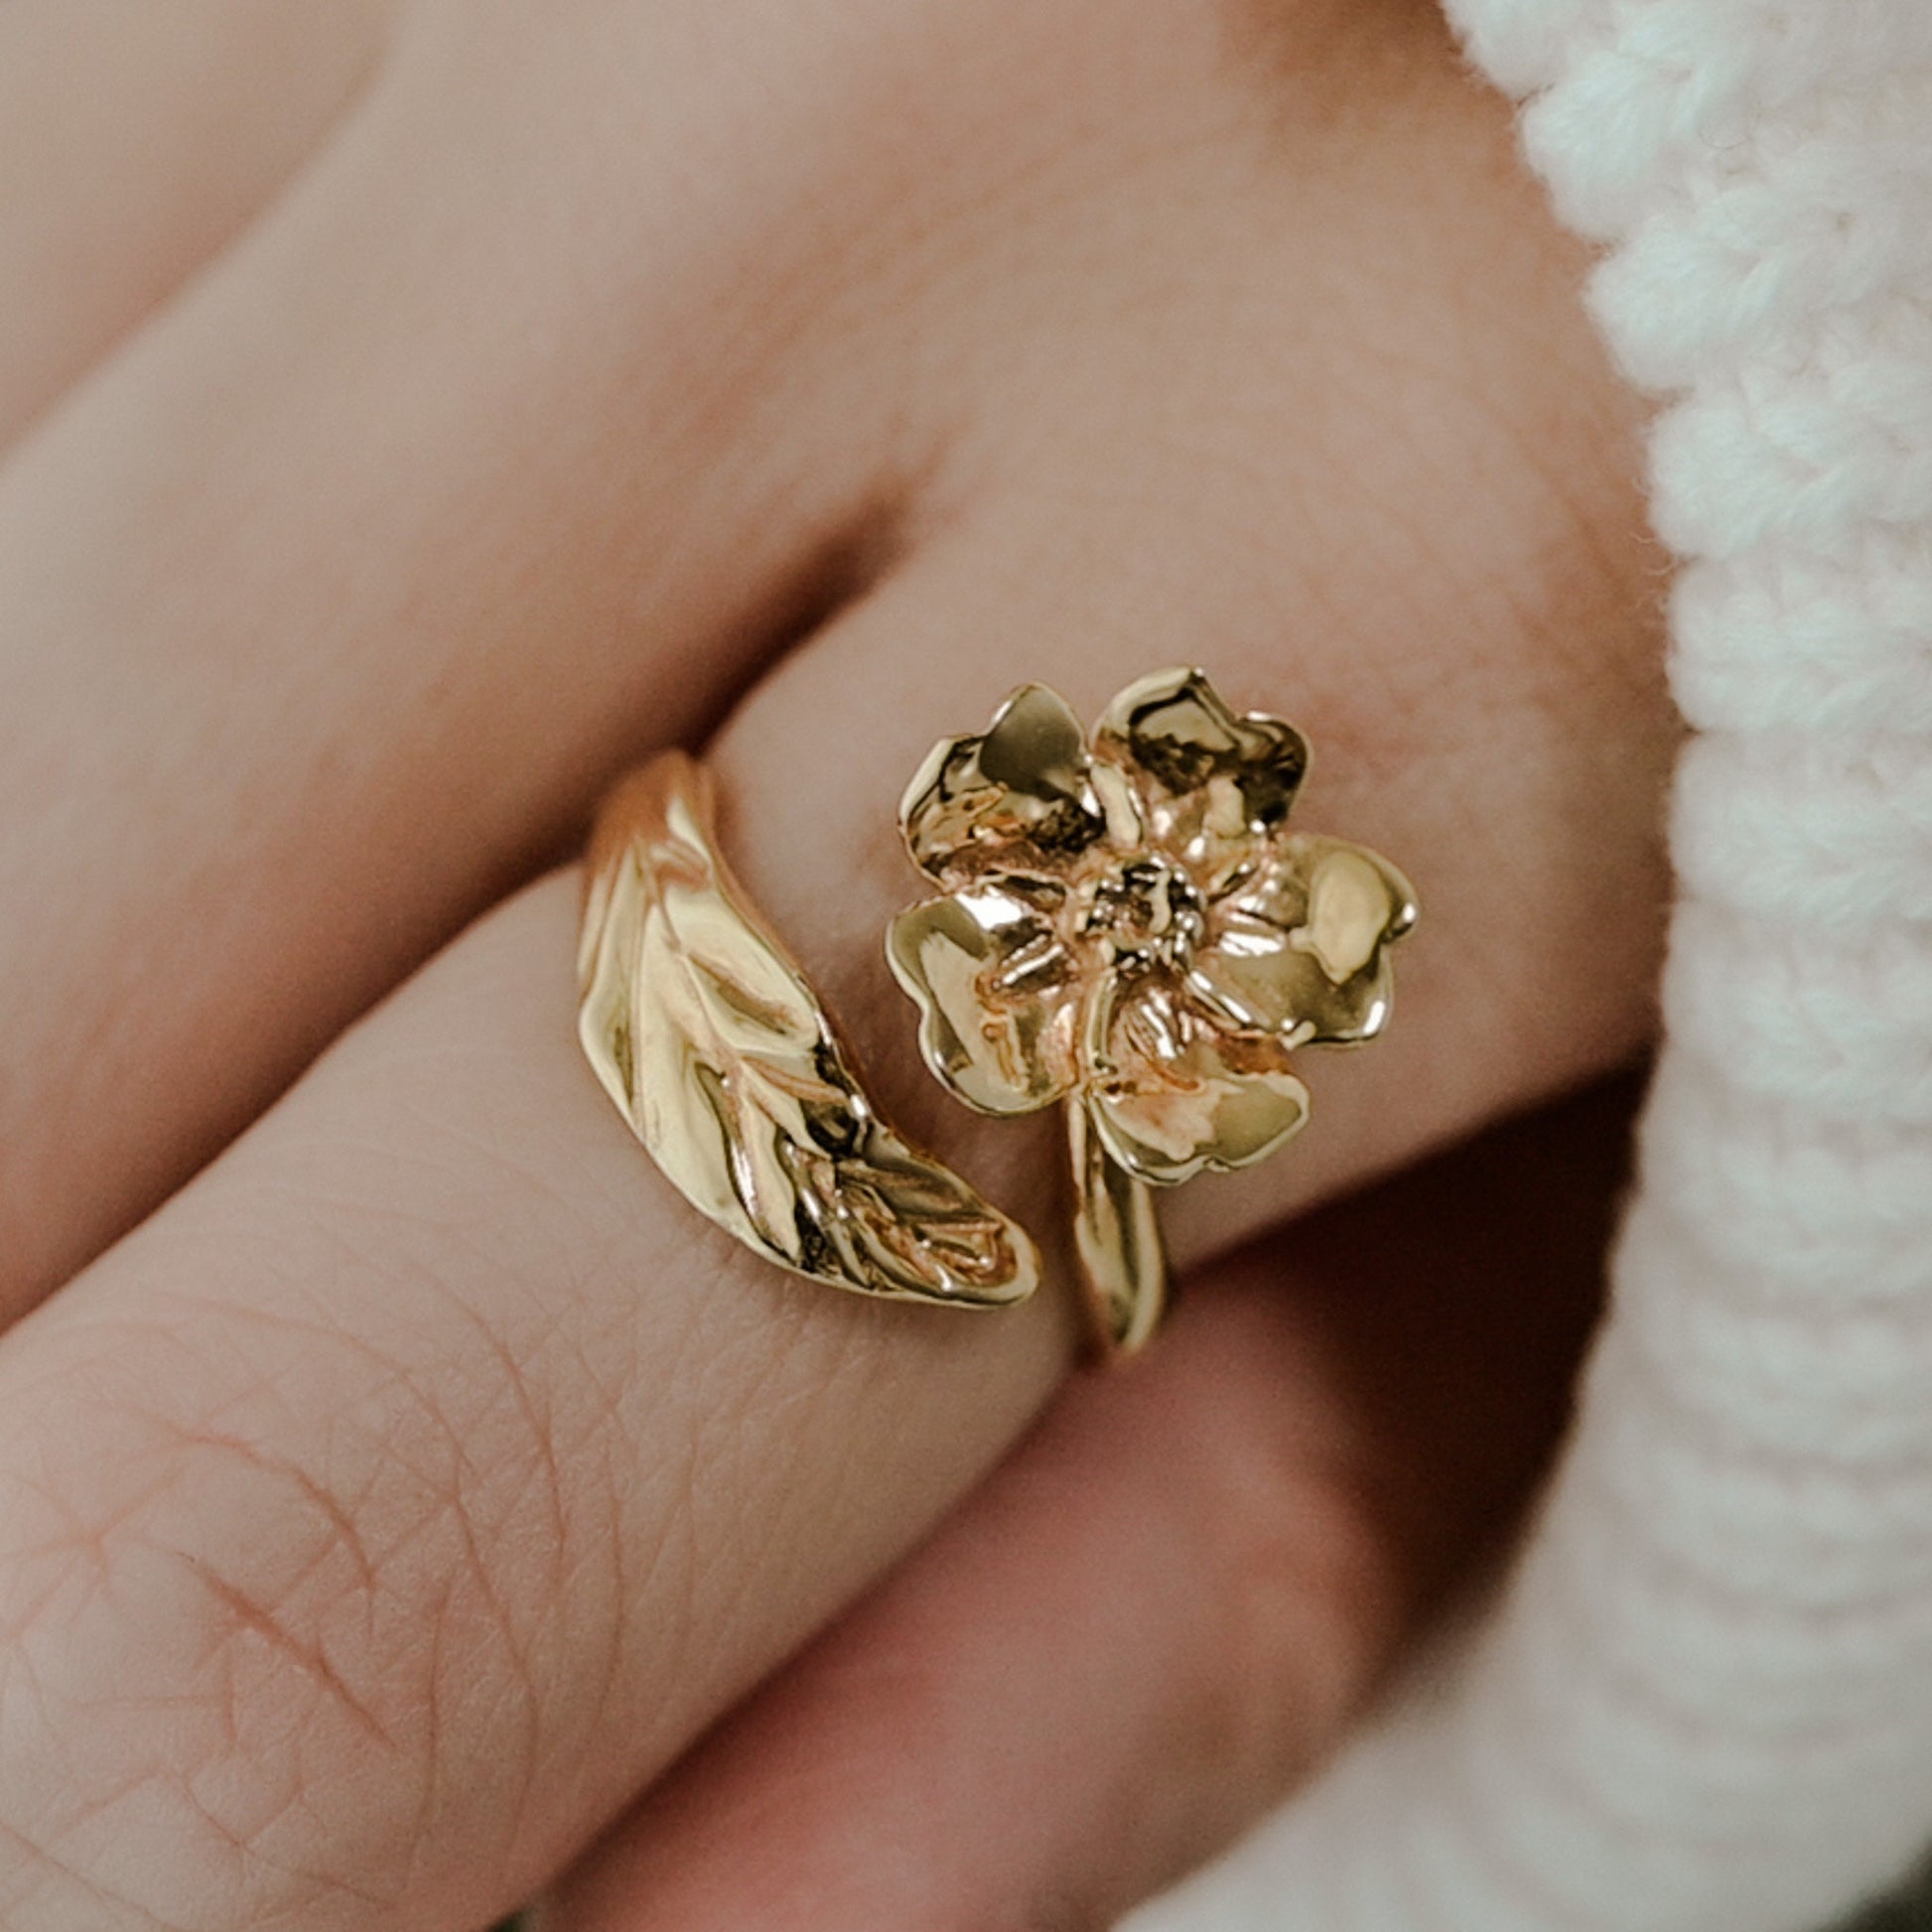 Forget Me Not Flower Ring